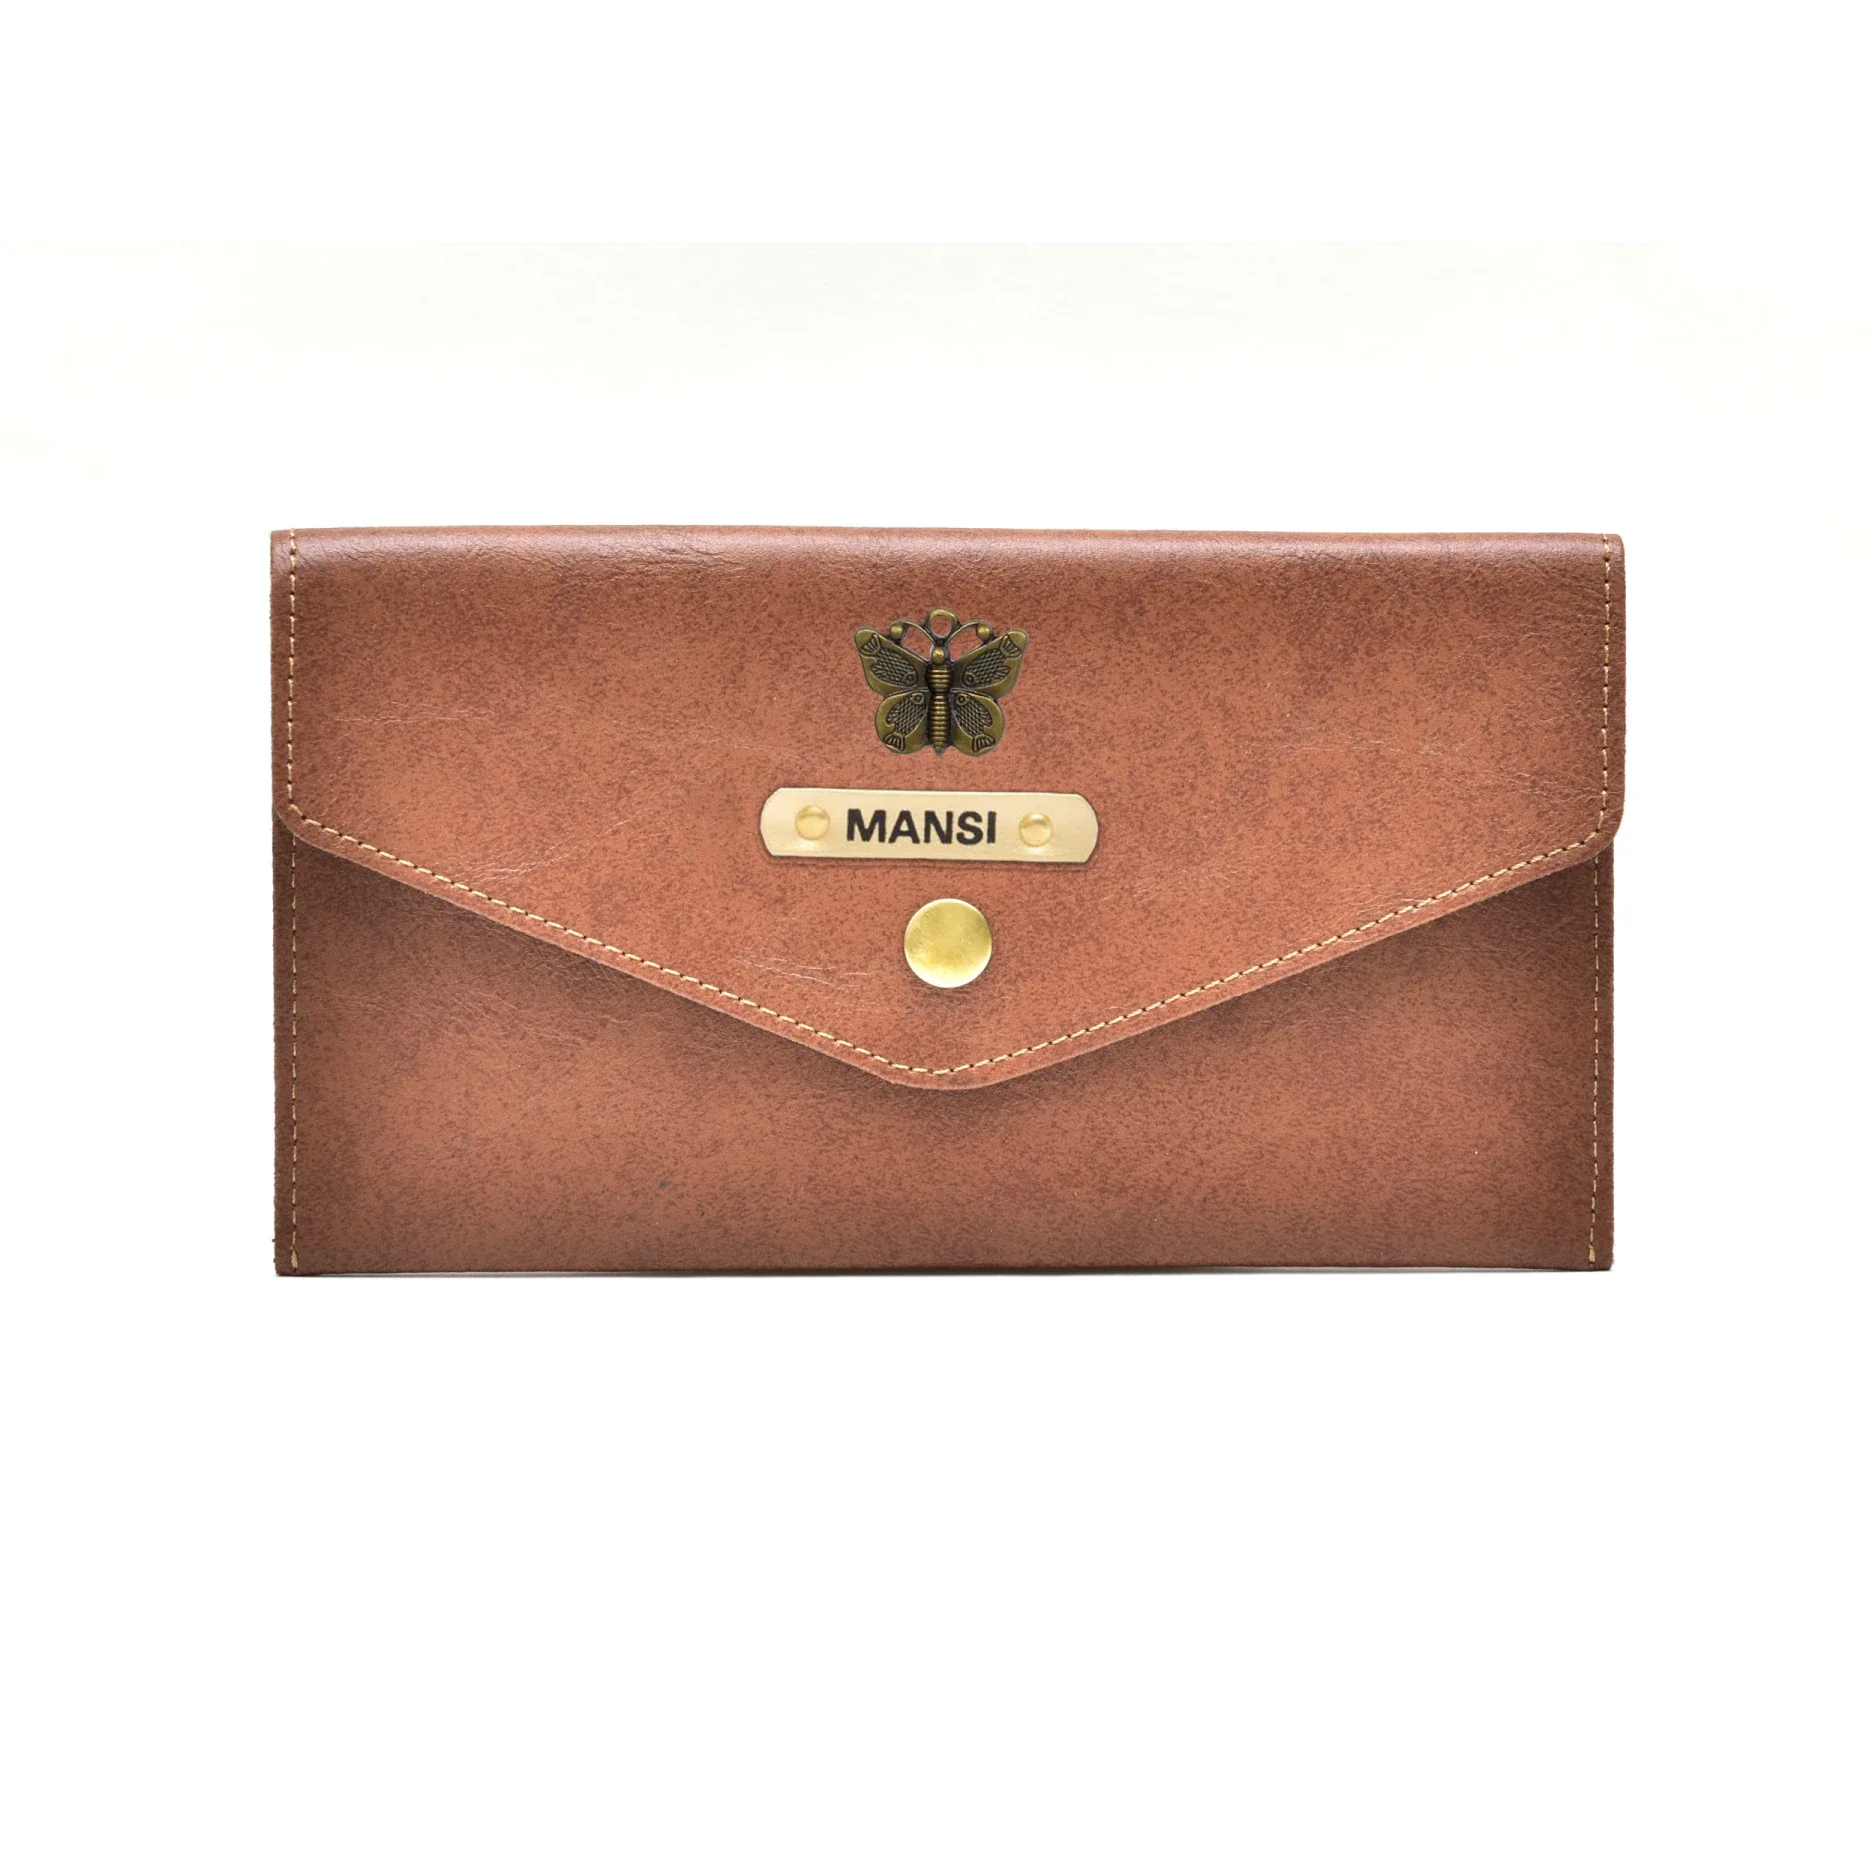 Keep all your important items organized and easily accessible with this personalized leather clutch. Choose your own color and design for a truly personalized touch.